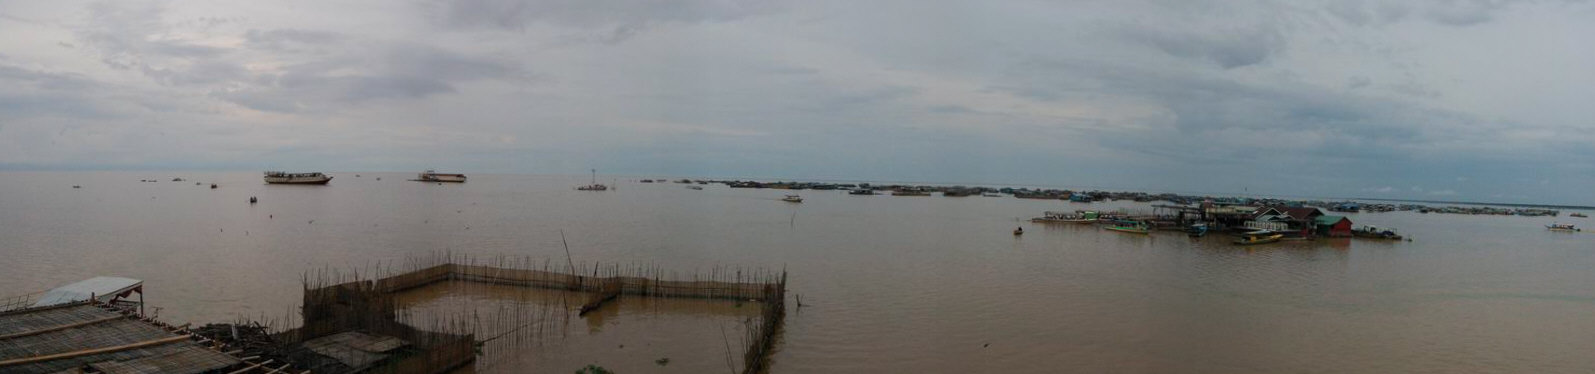 The Floating Village of Chong Kneas (Tonl Sap, Cambodia)